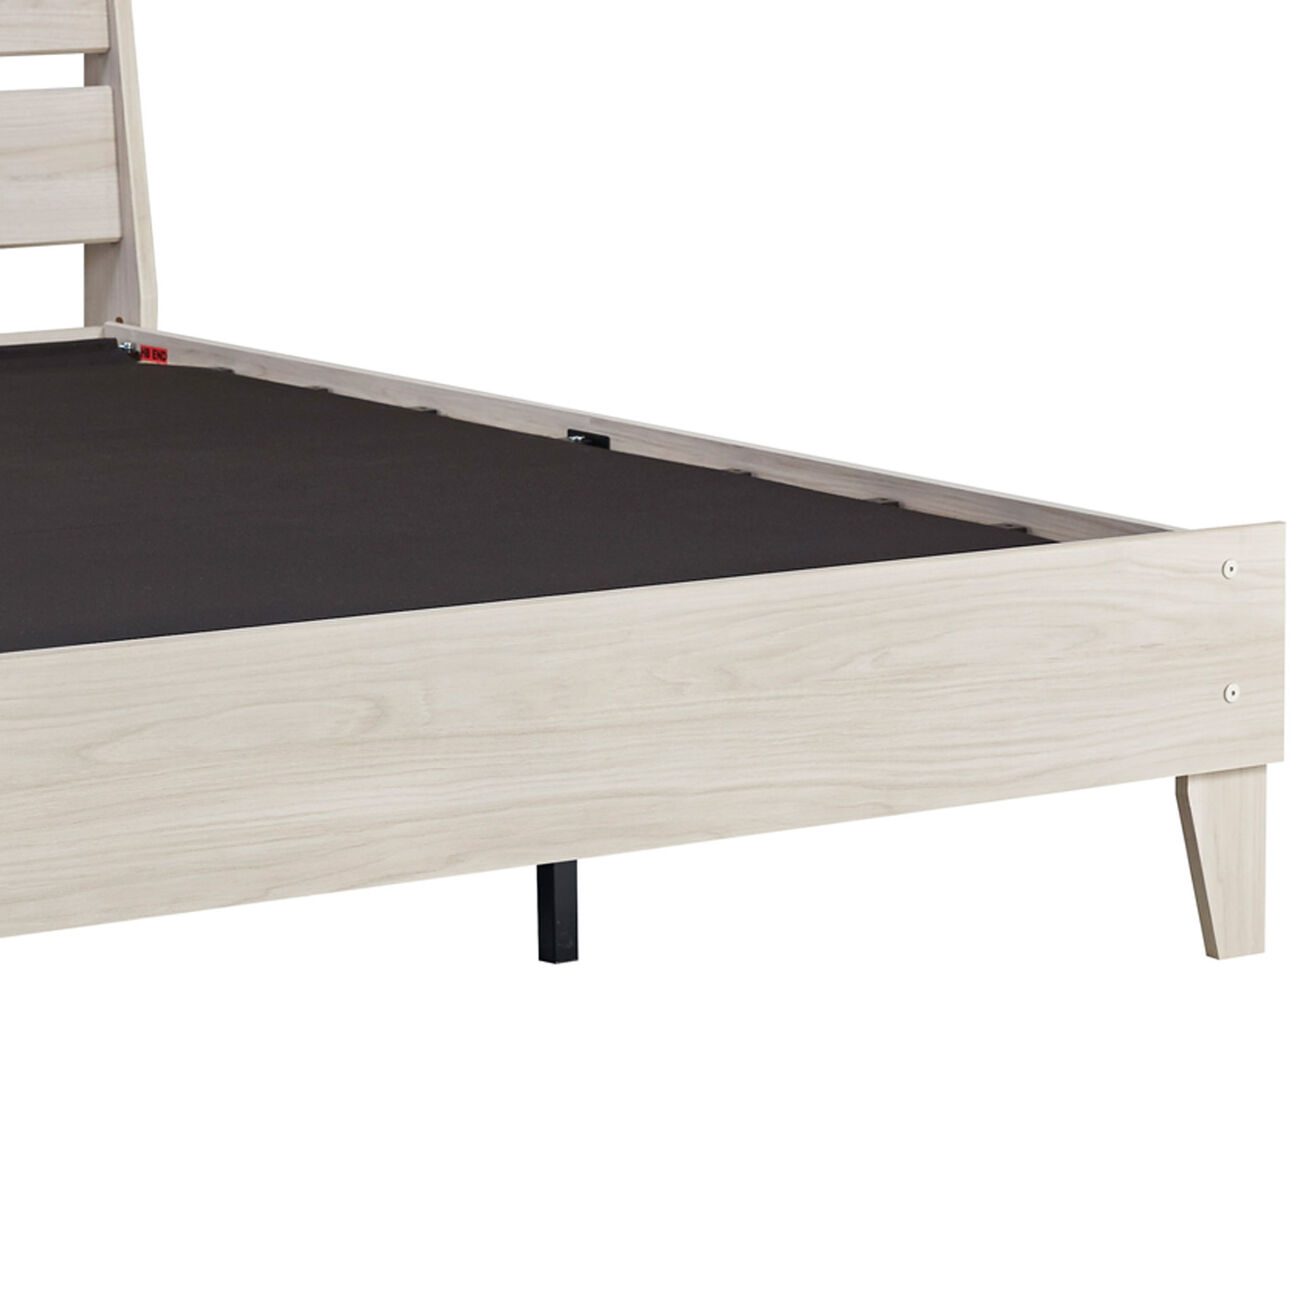 Wooden Full Platform Bed with Grains, Off White